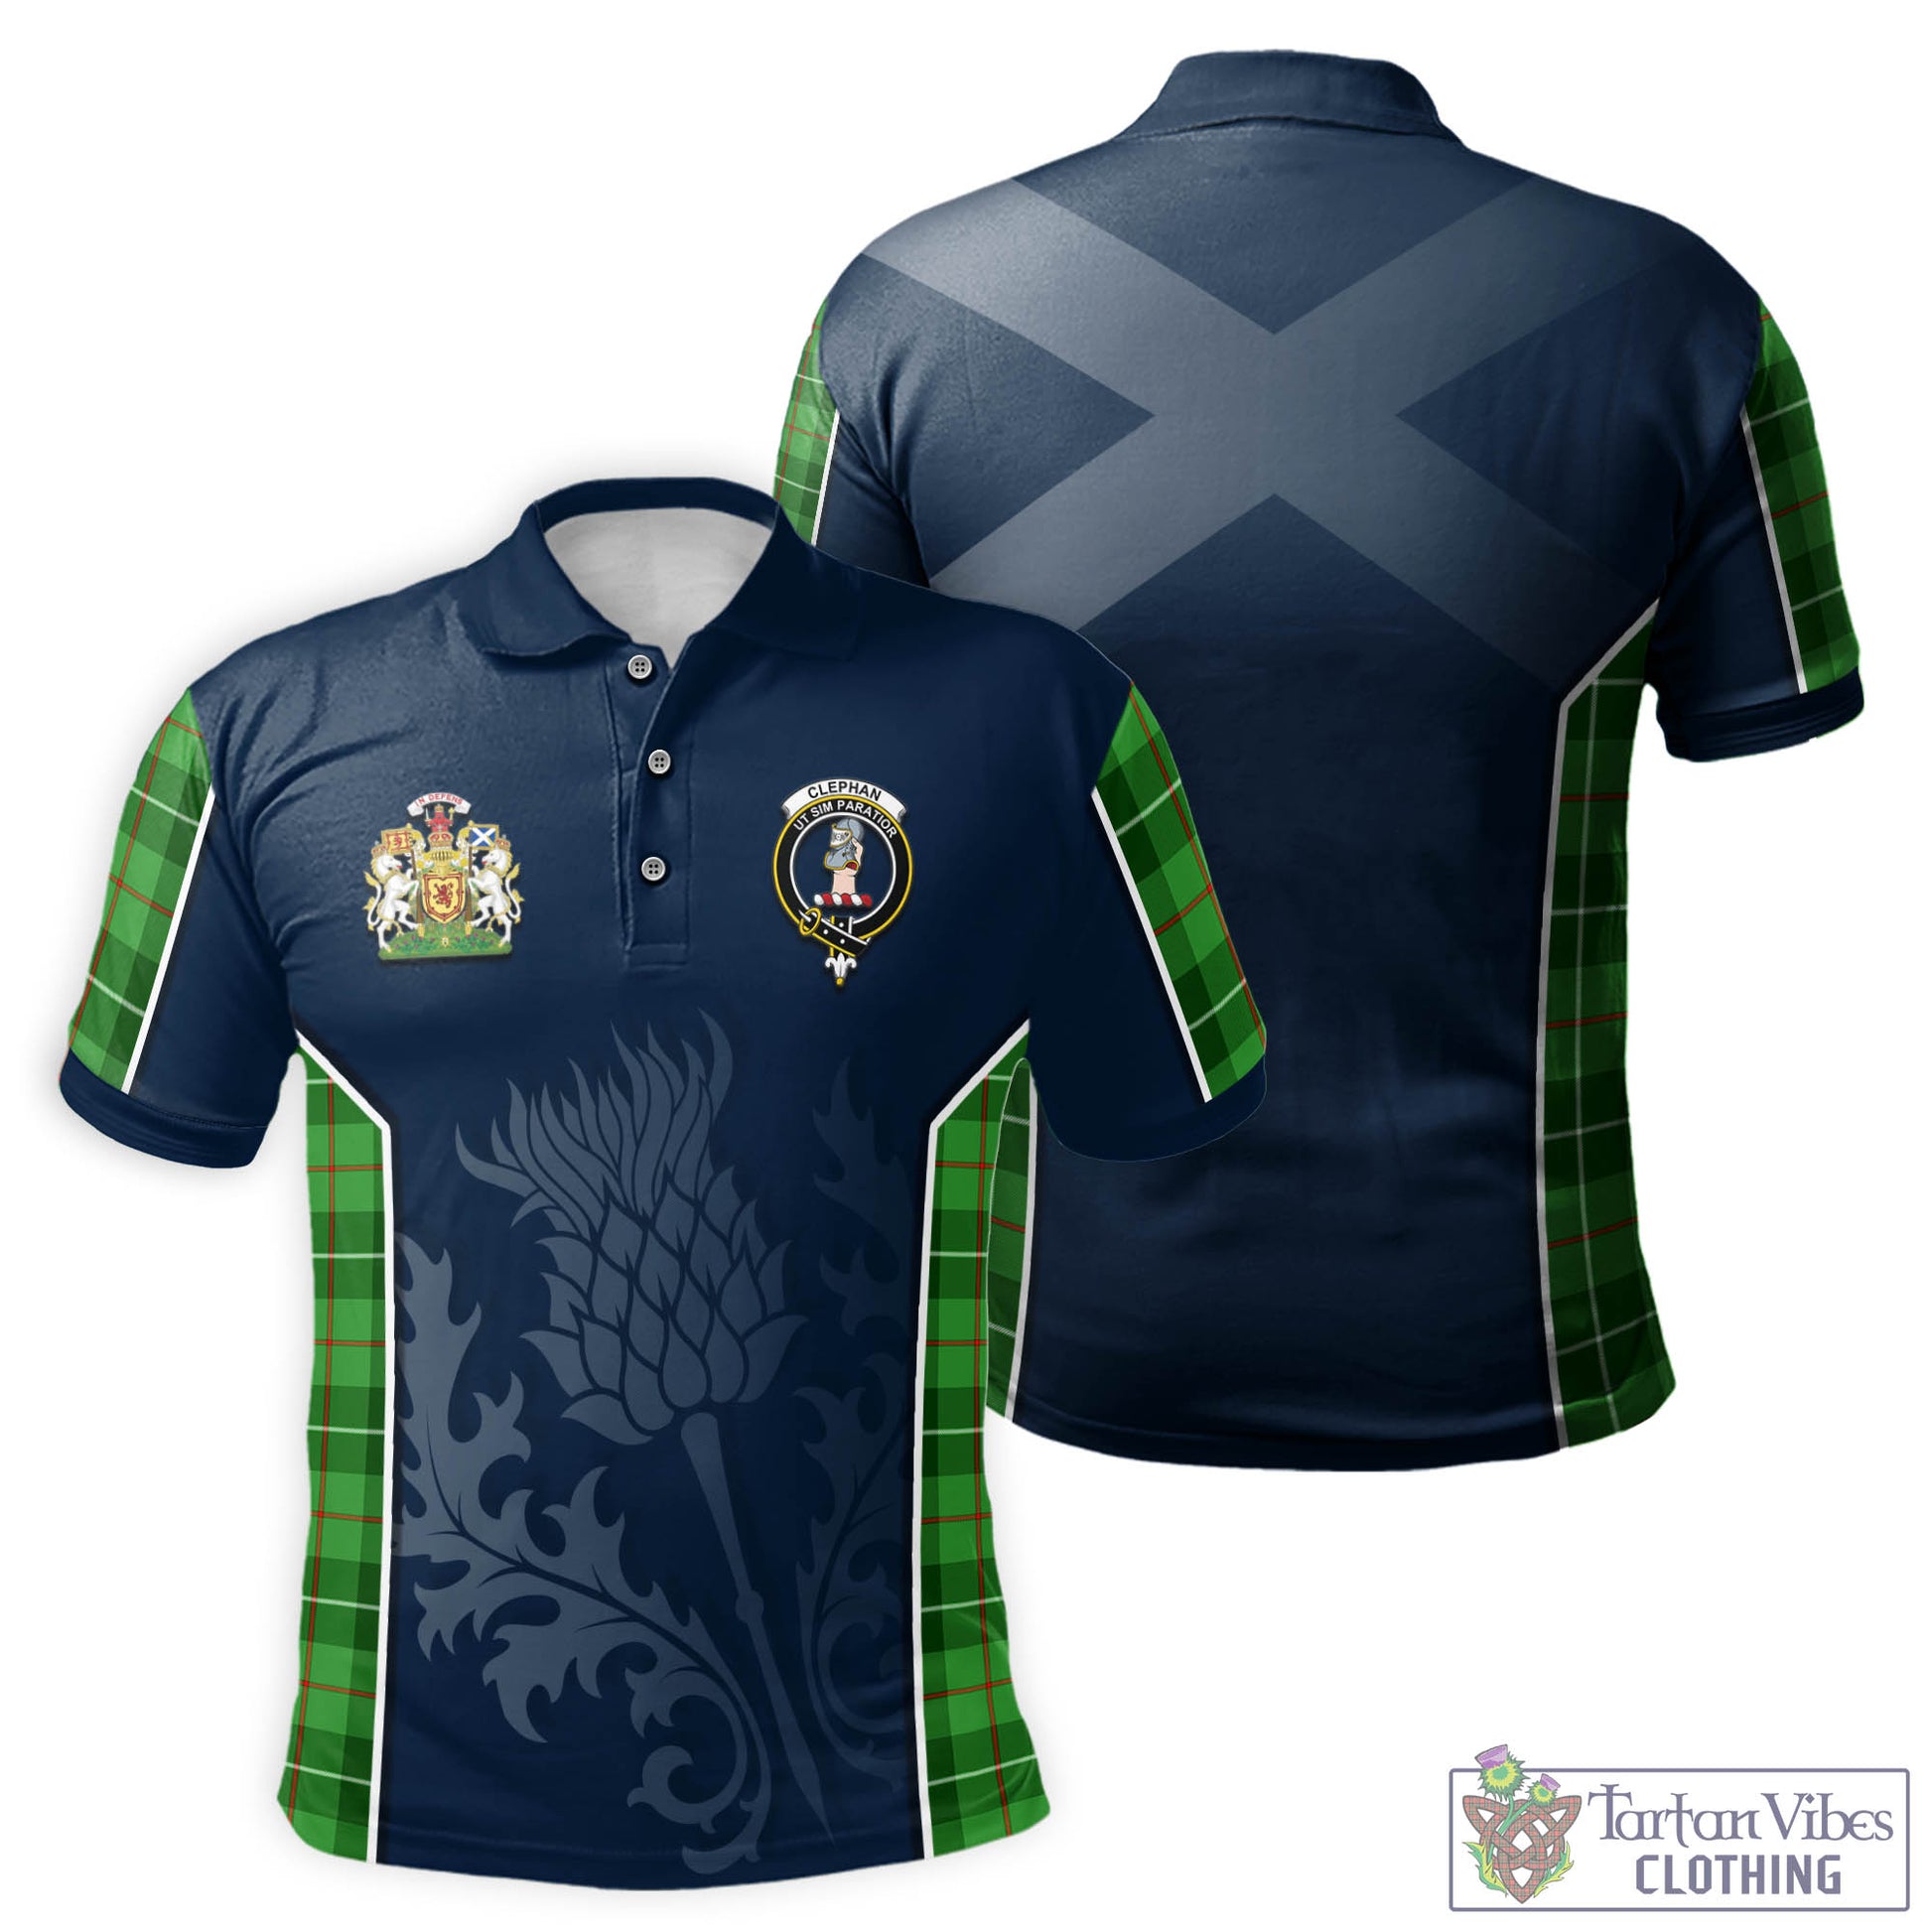 Tartan Vibes Clothing Clephan Tartan Men's Polo Shirt with Family Crest and Scottish Thistle Vibes Sport Style